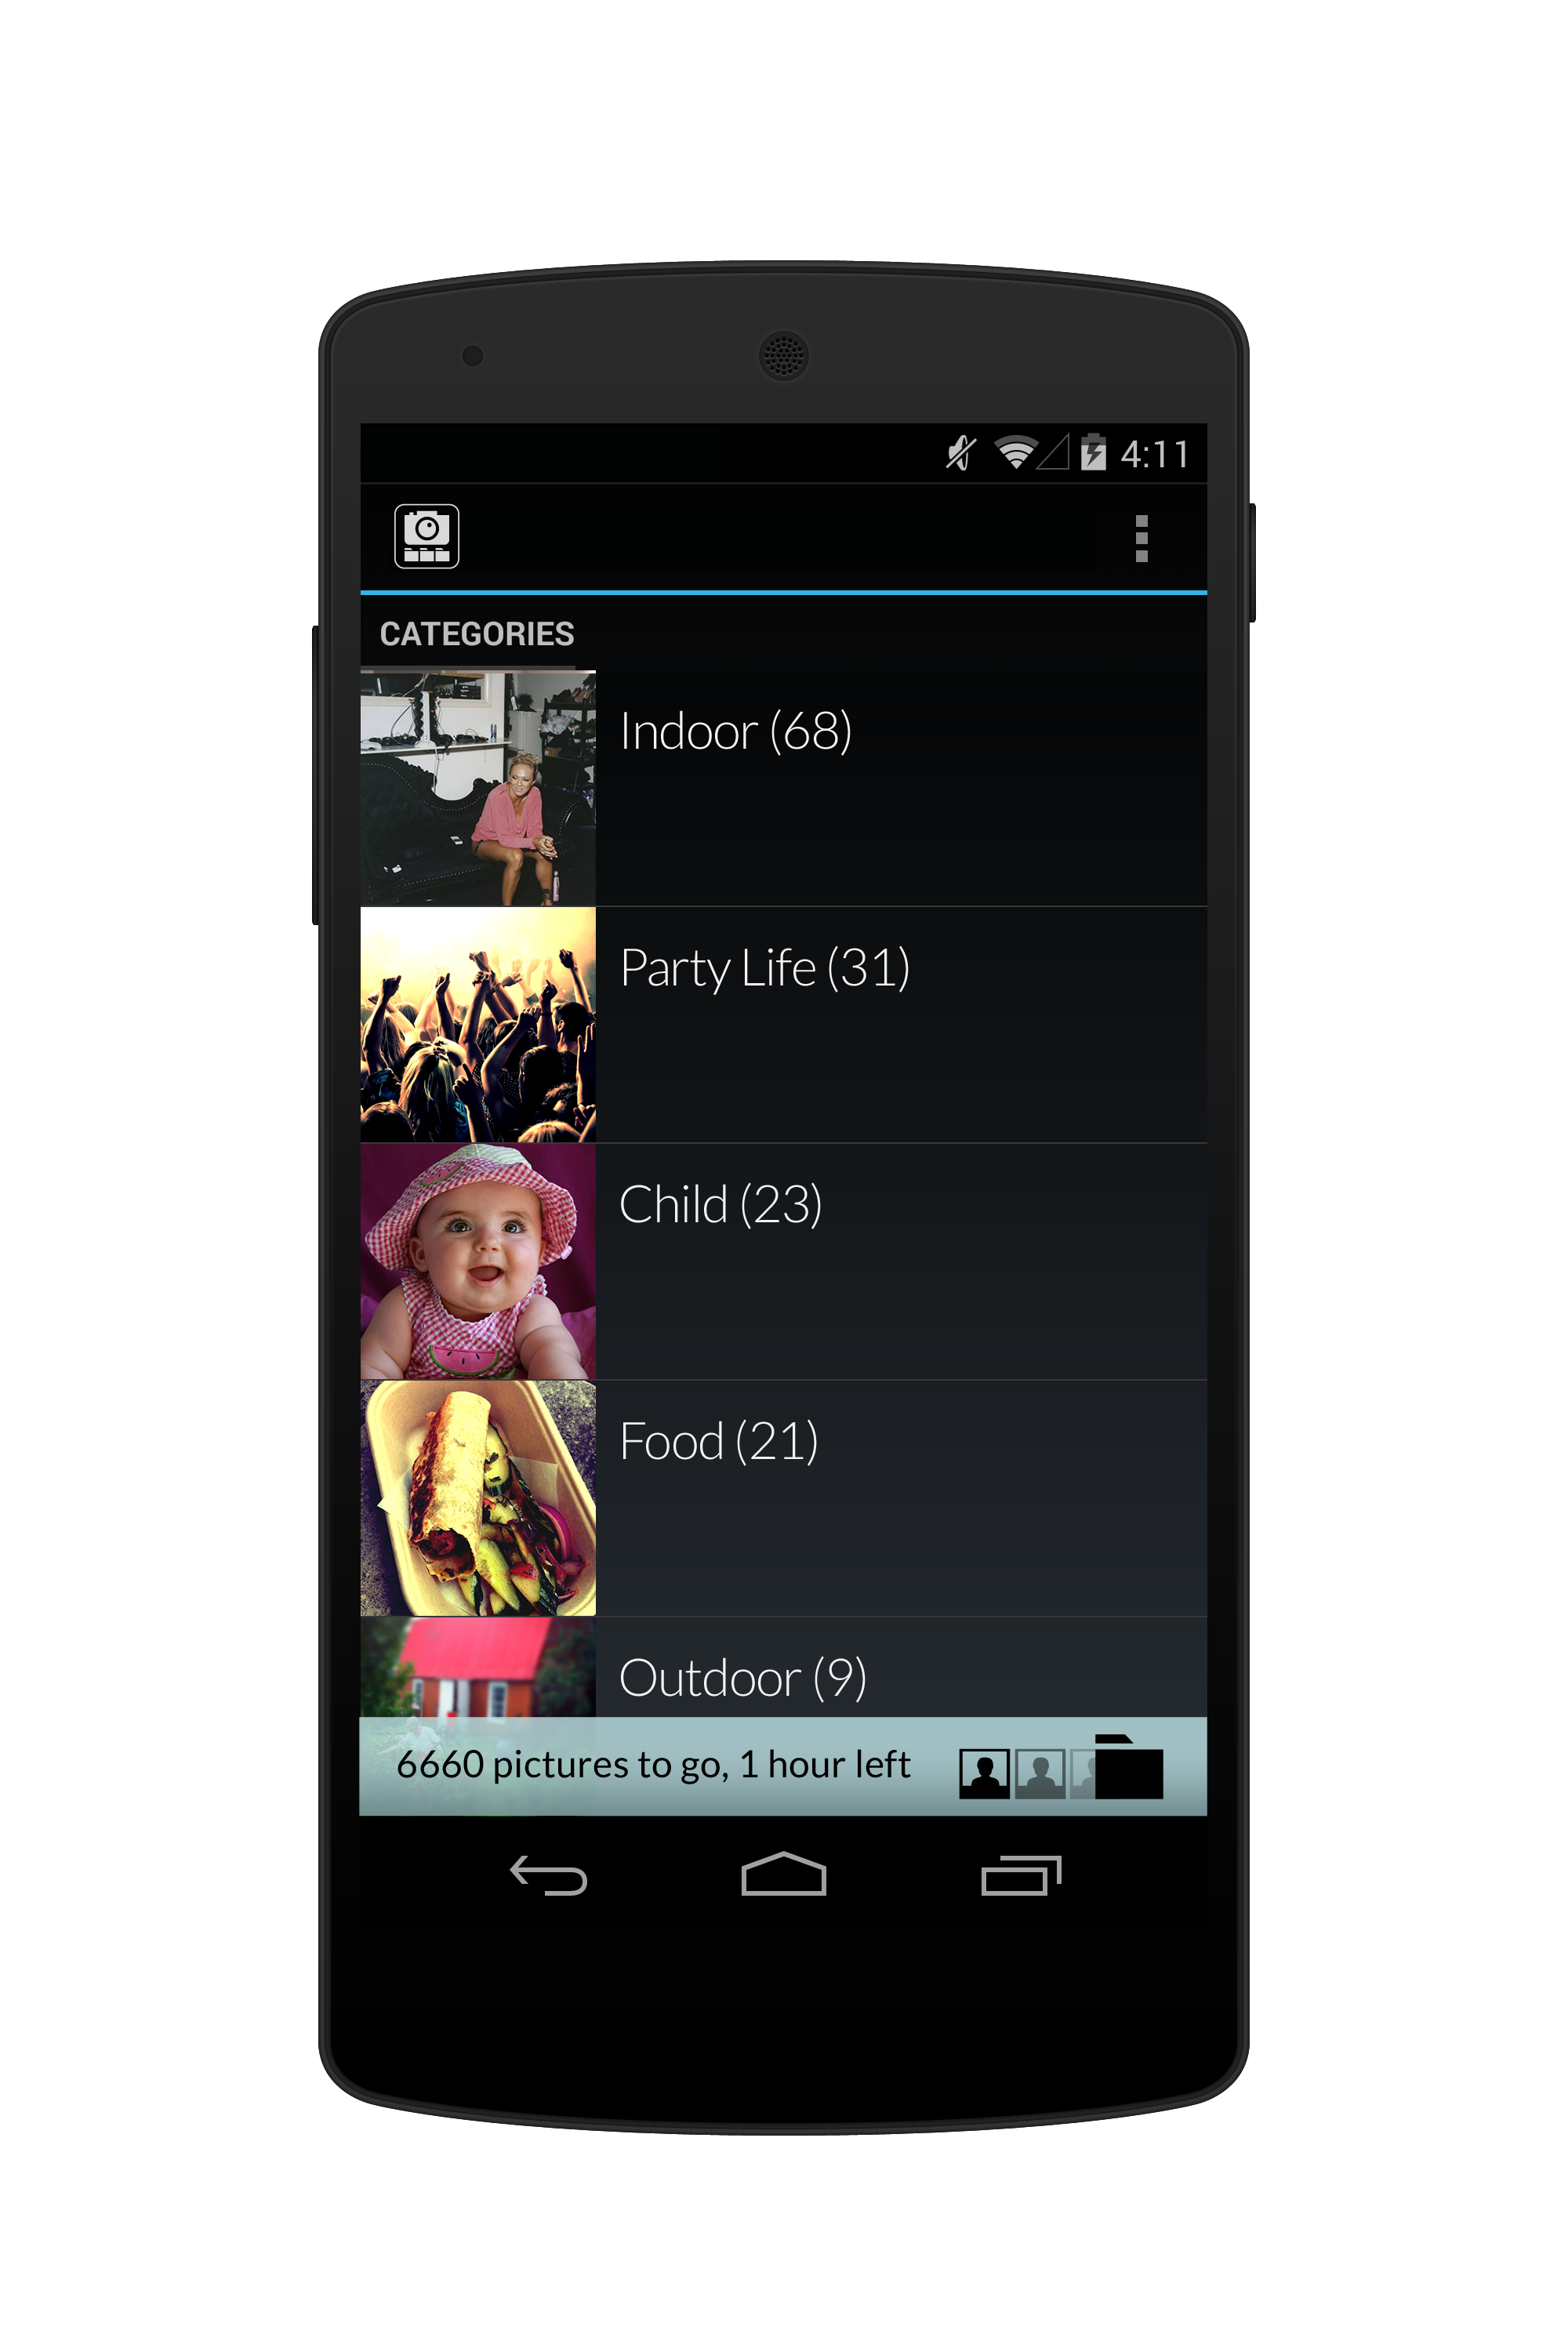 Overview of albums automatically created by Impala to sort pictures on the mobile phone